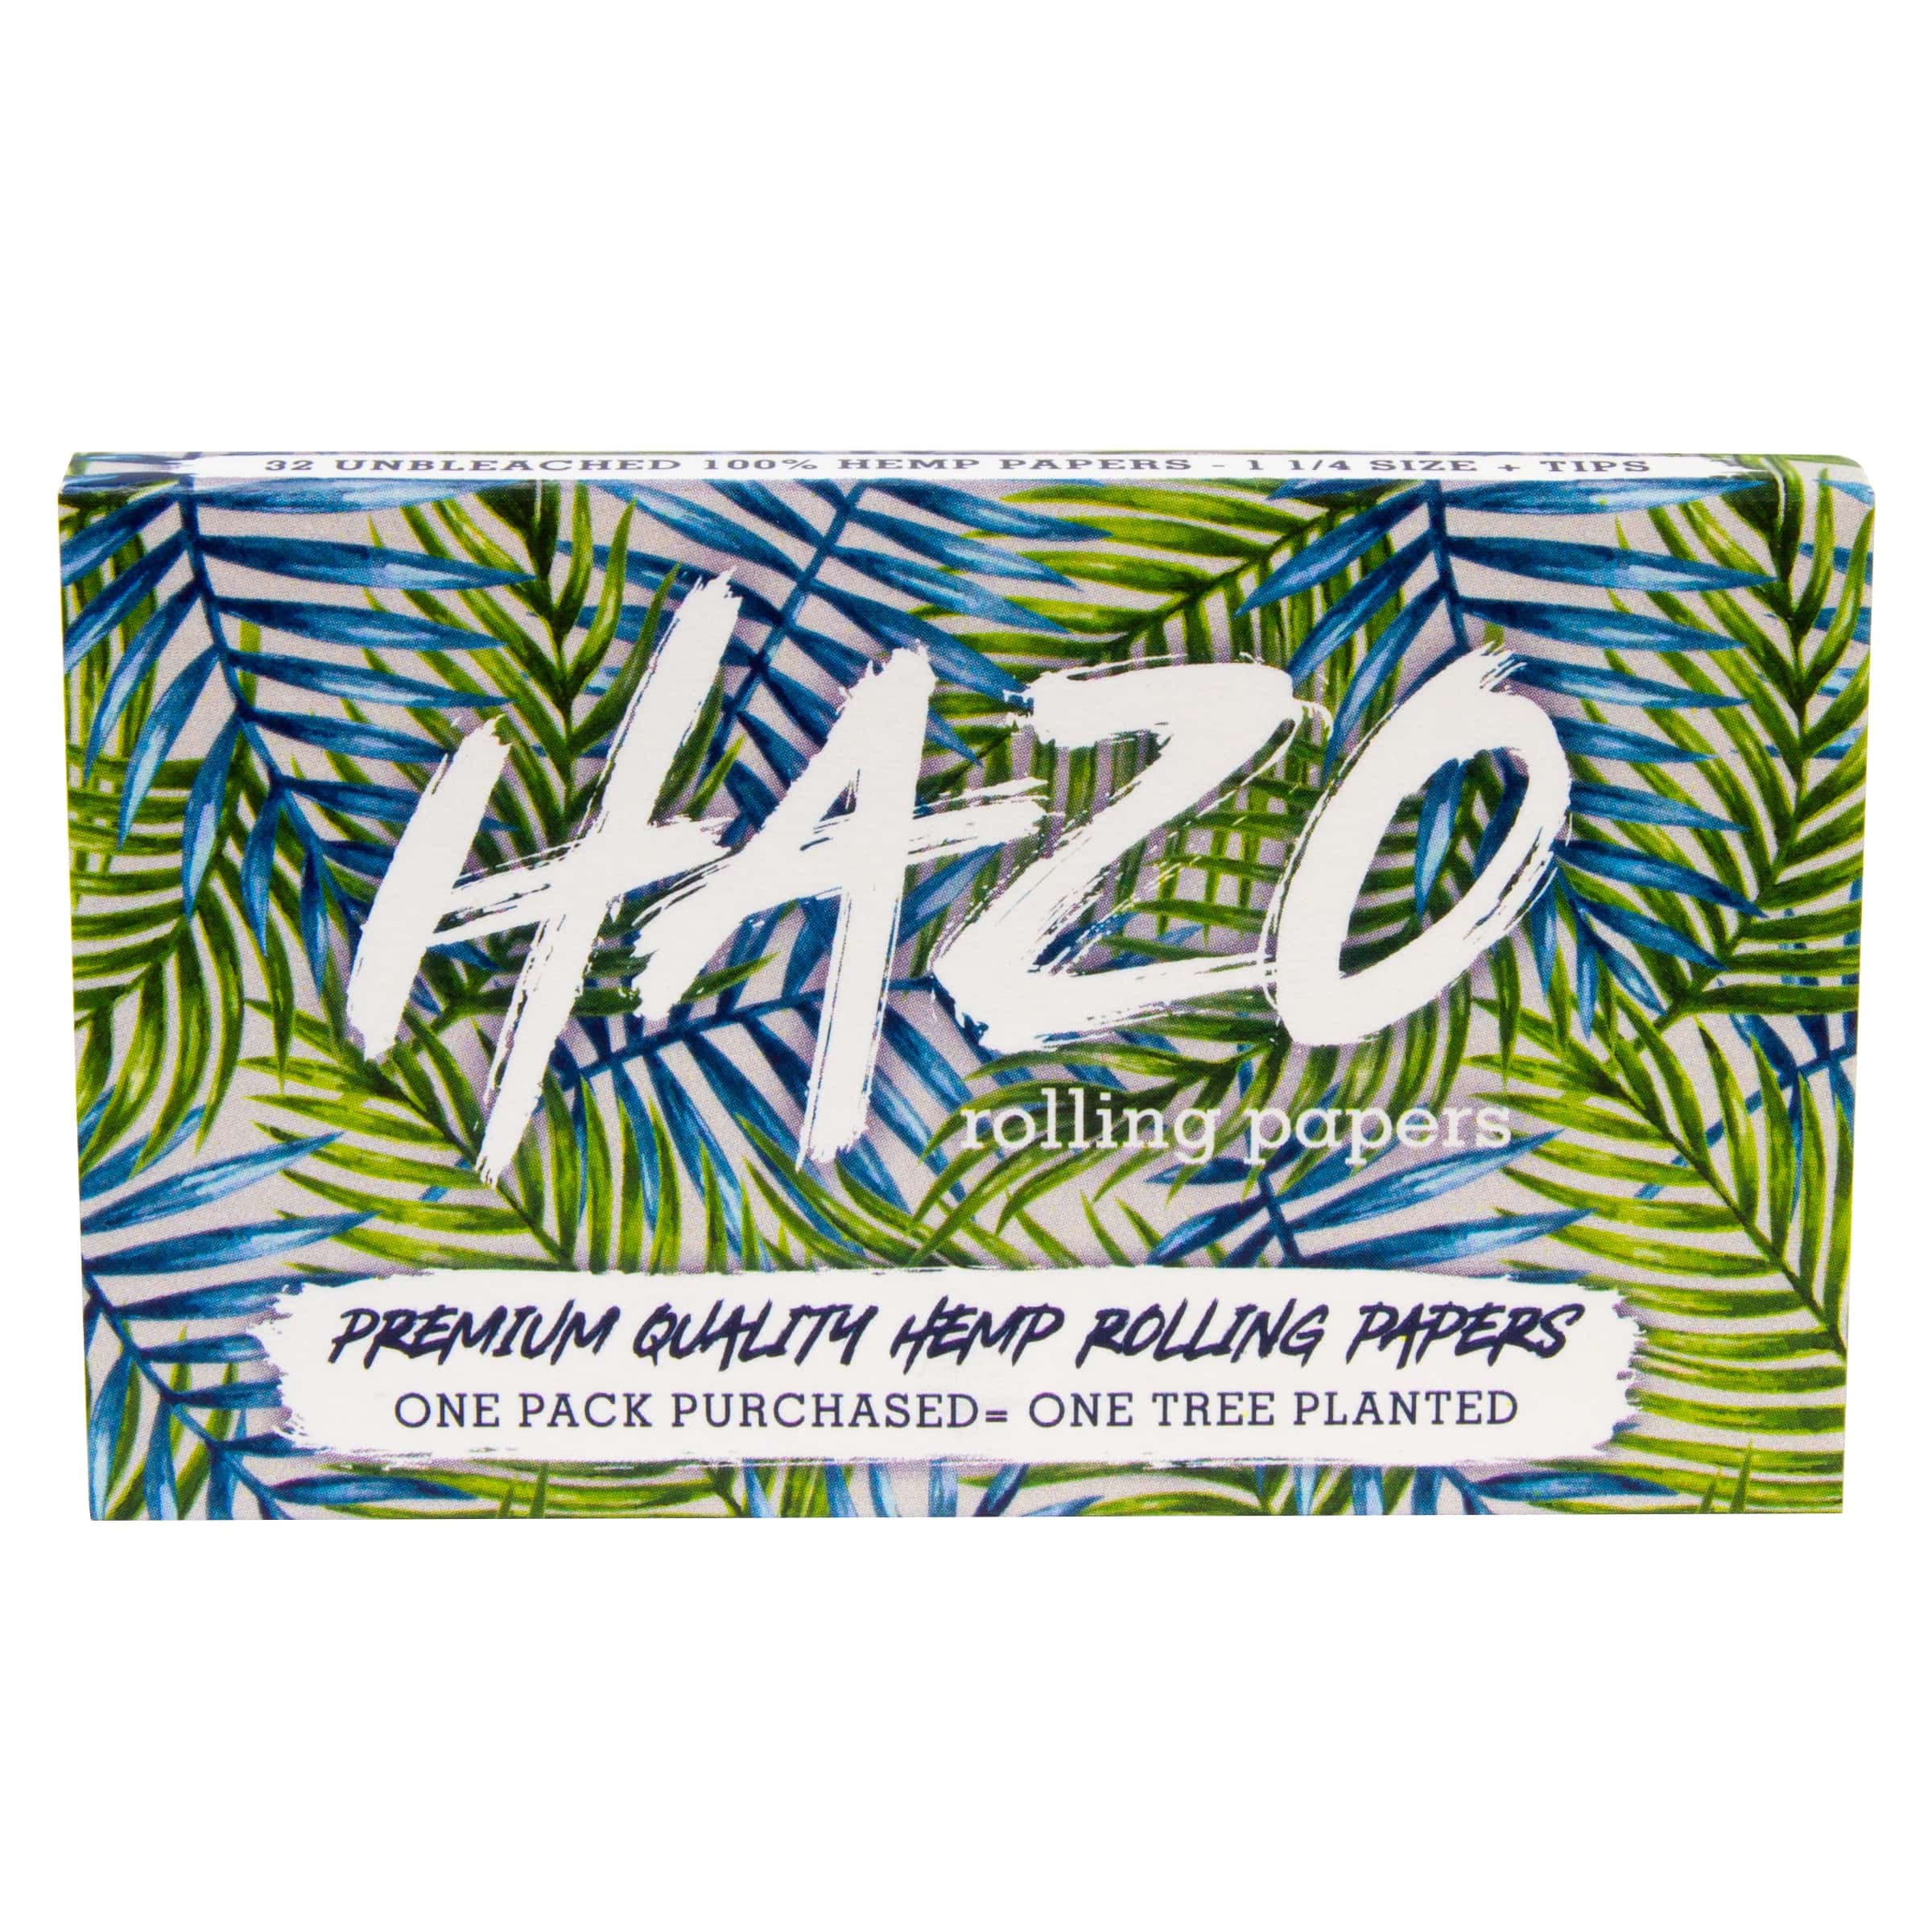 1 1/4 Size Unbleached Hemp Rolling Papers + Tips